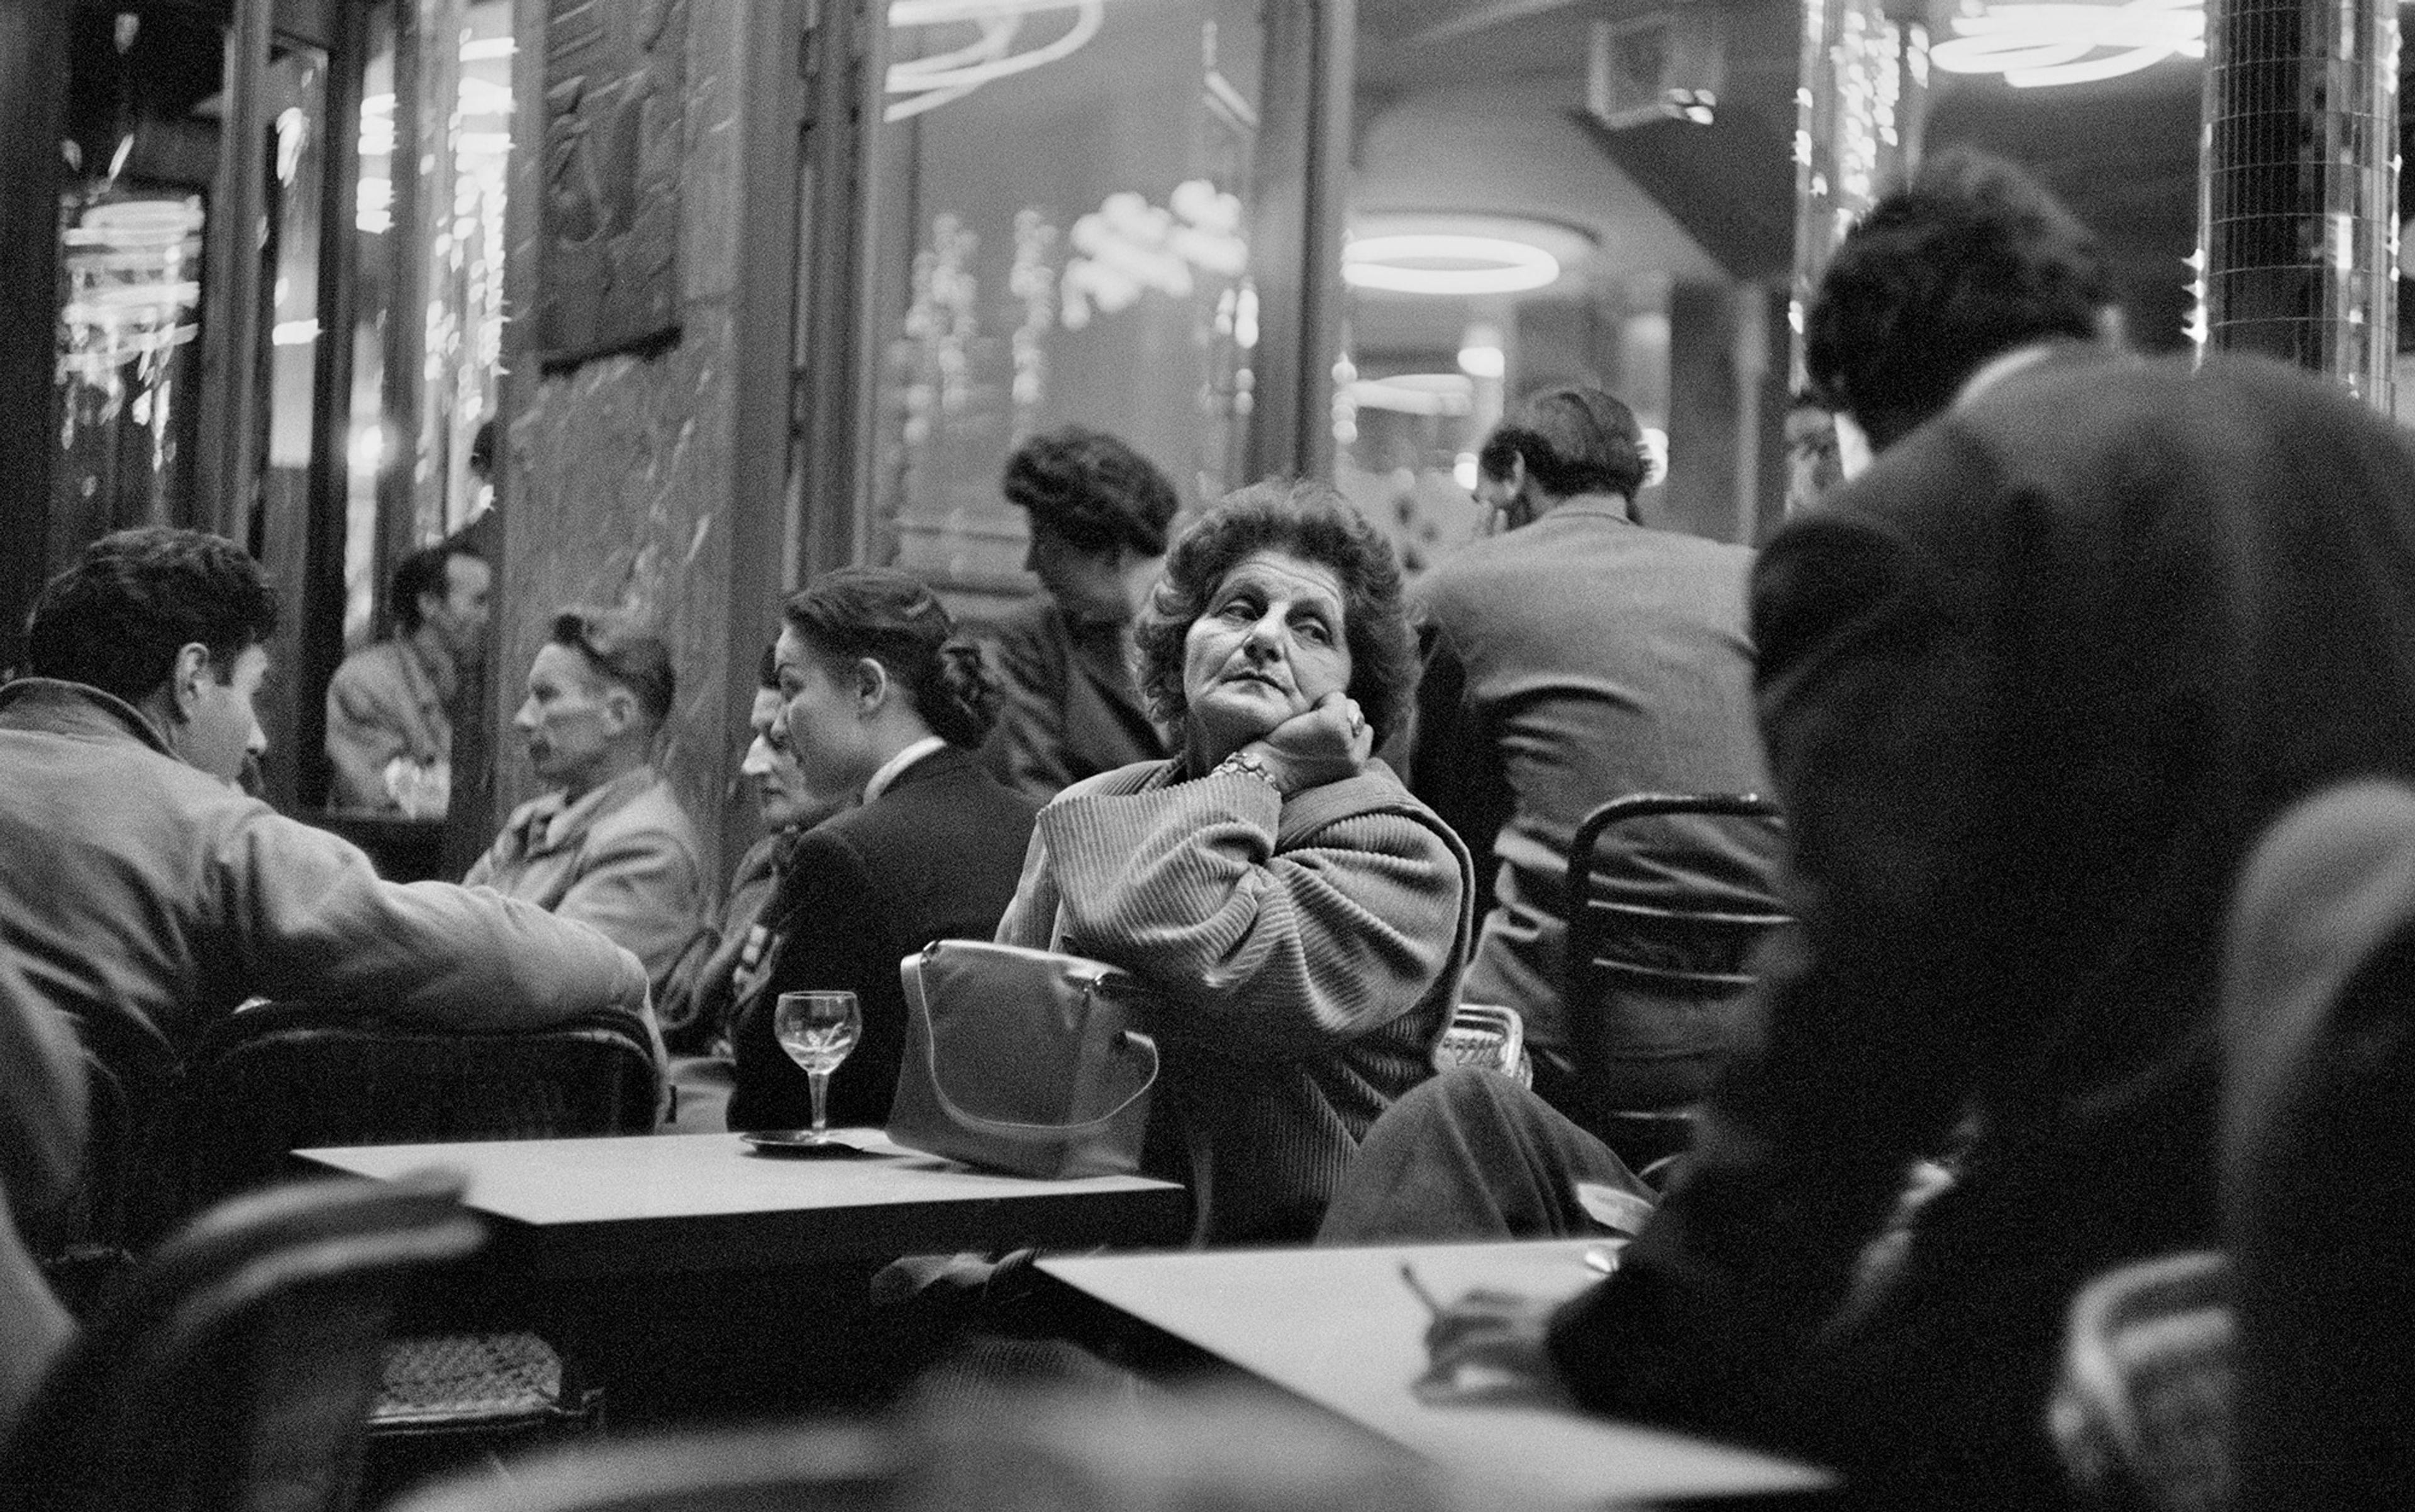 A woman sits alone in a Parisian cafe with a glass of wine, while the neighbouring tables are full of socialising groups